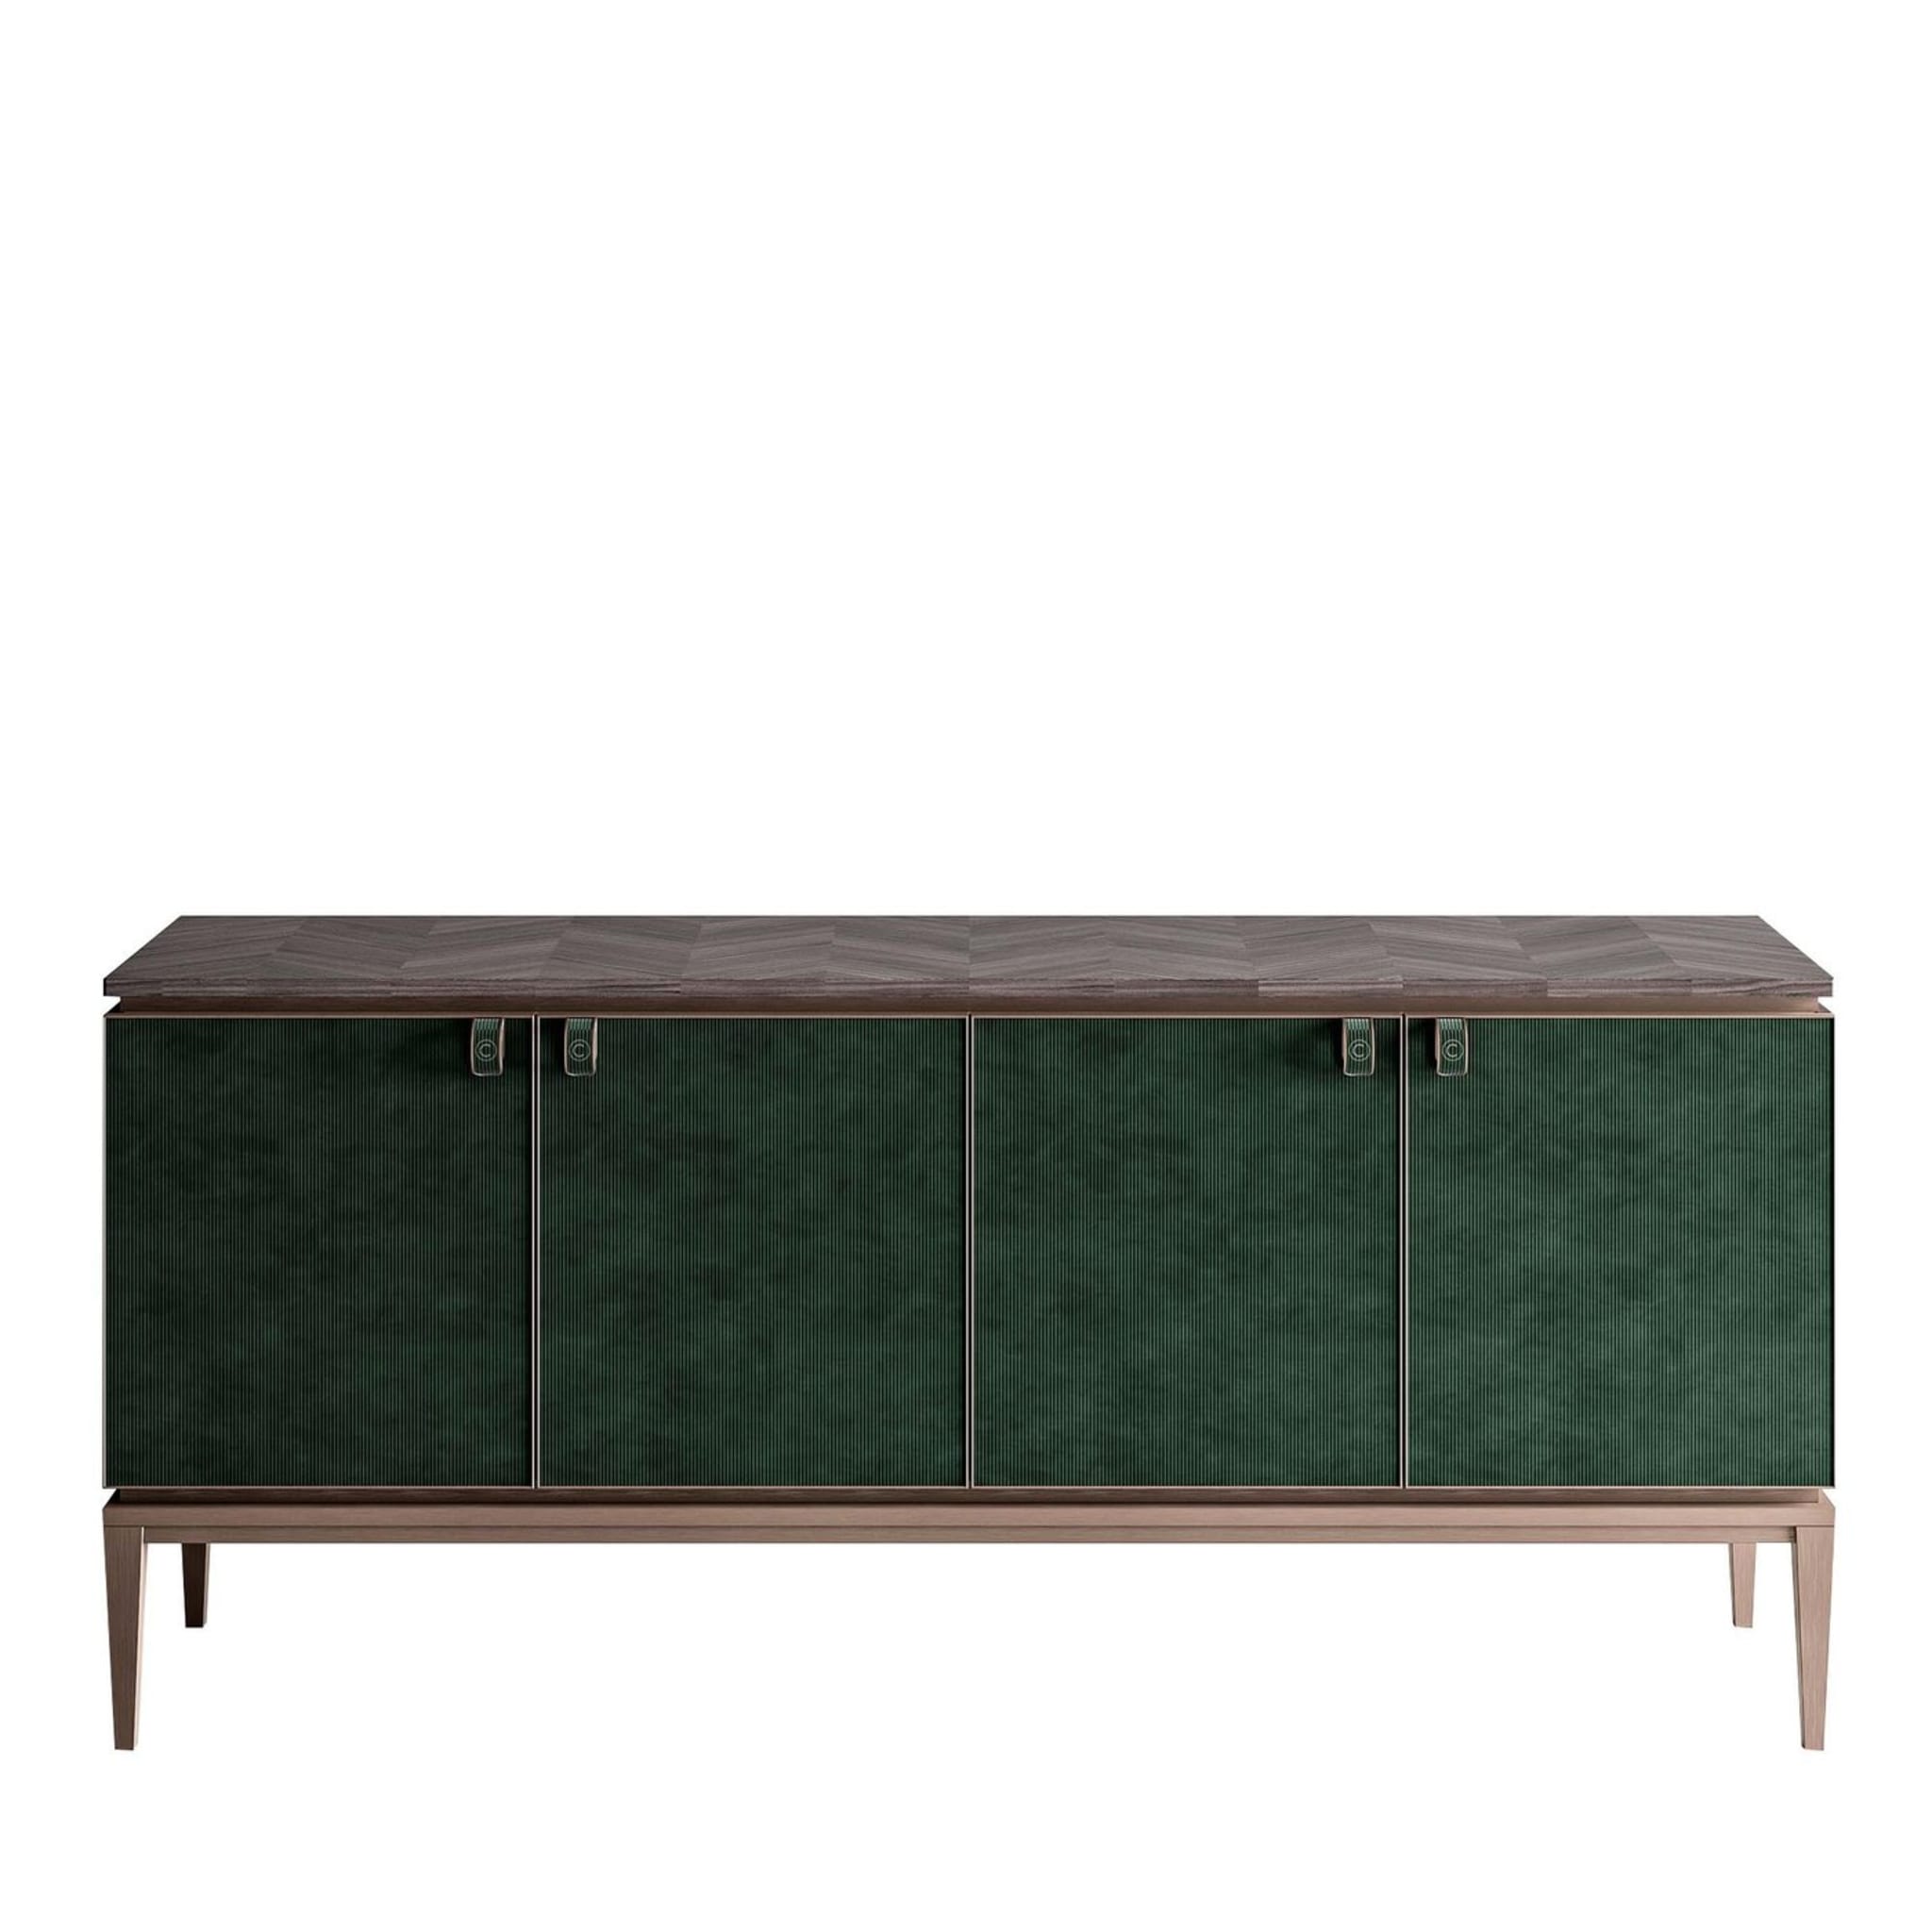 Nabuck Leather Sideboard - Main view